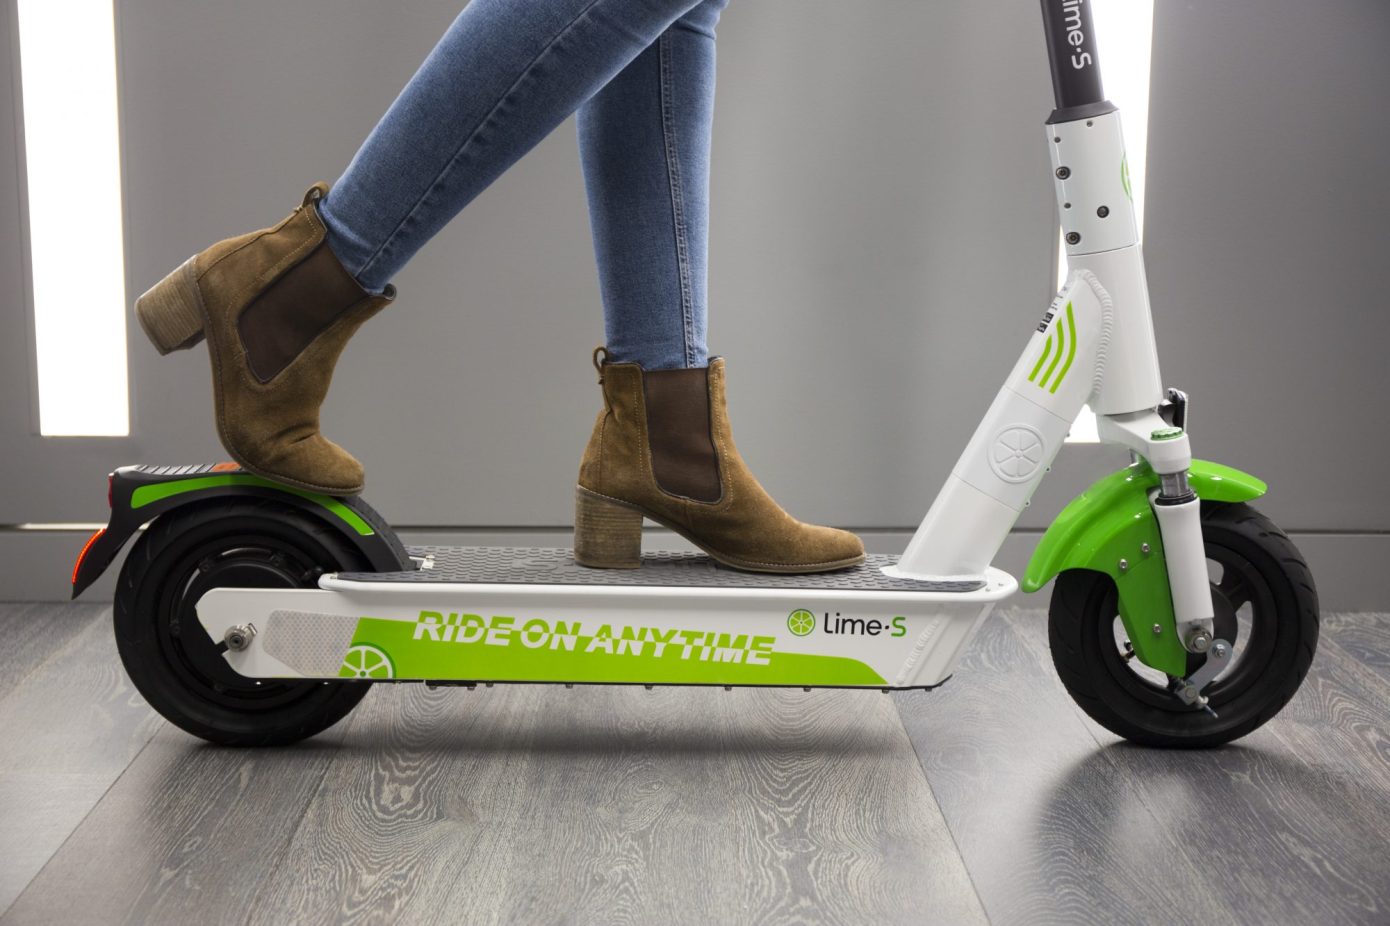 Lime halts scooter service in Switzerland after possible software glitch throws users off mid-ride | TechCrunch